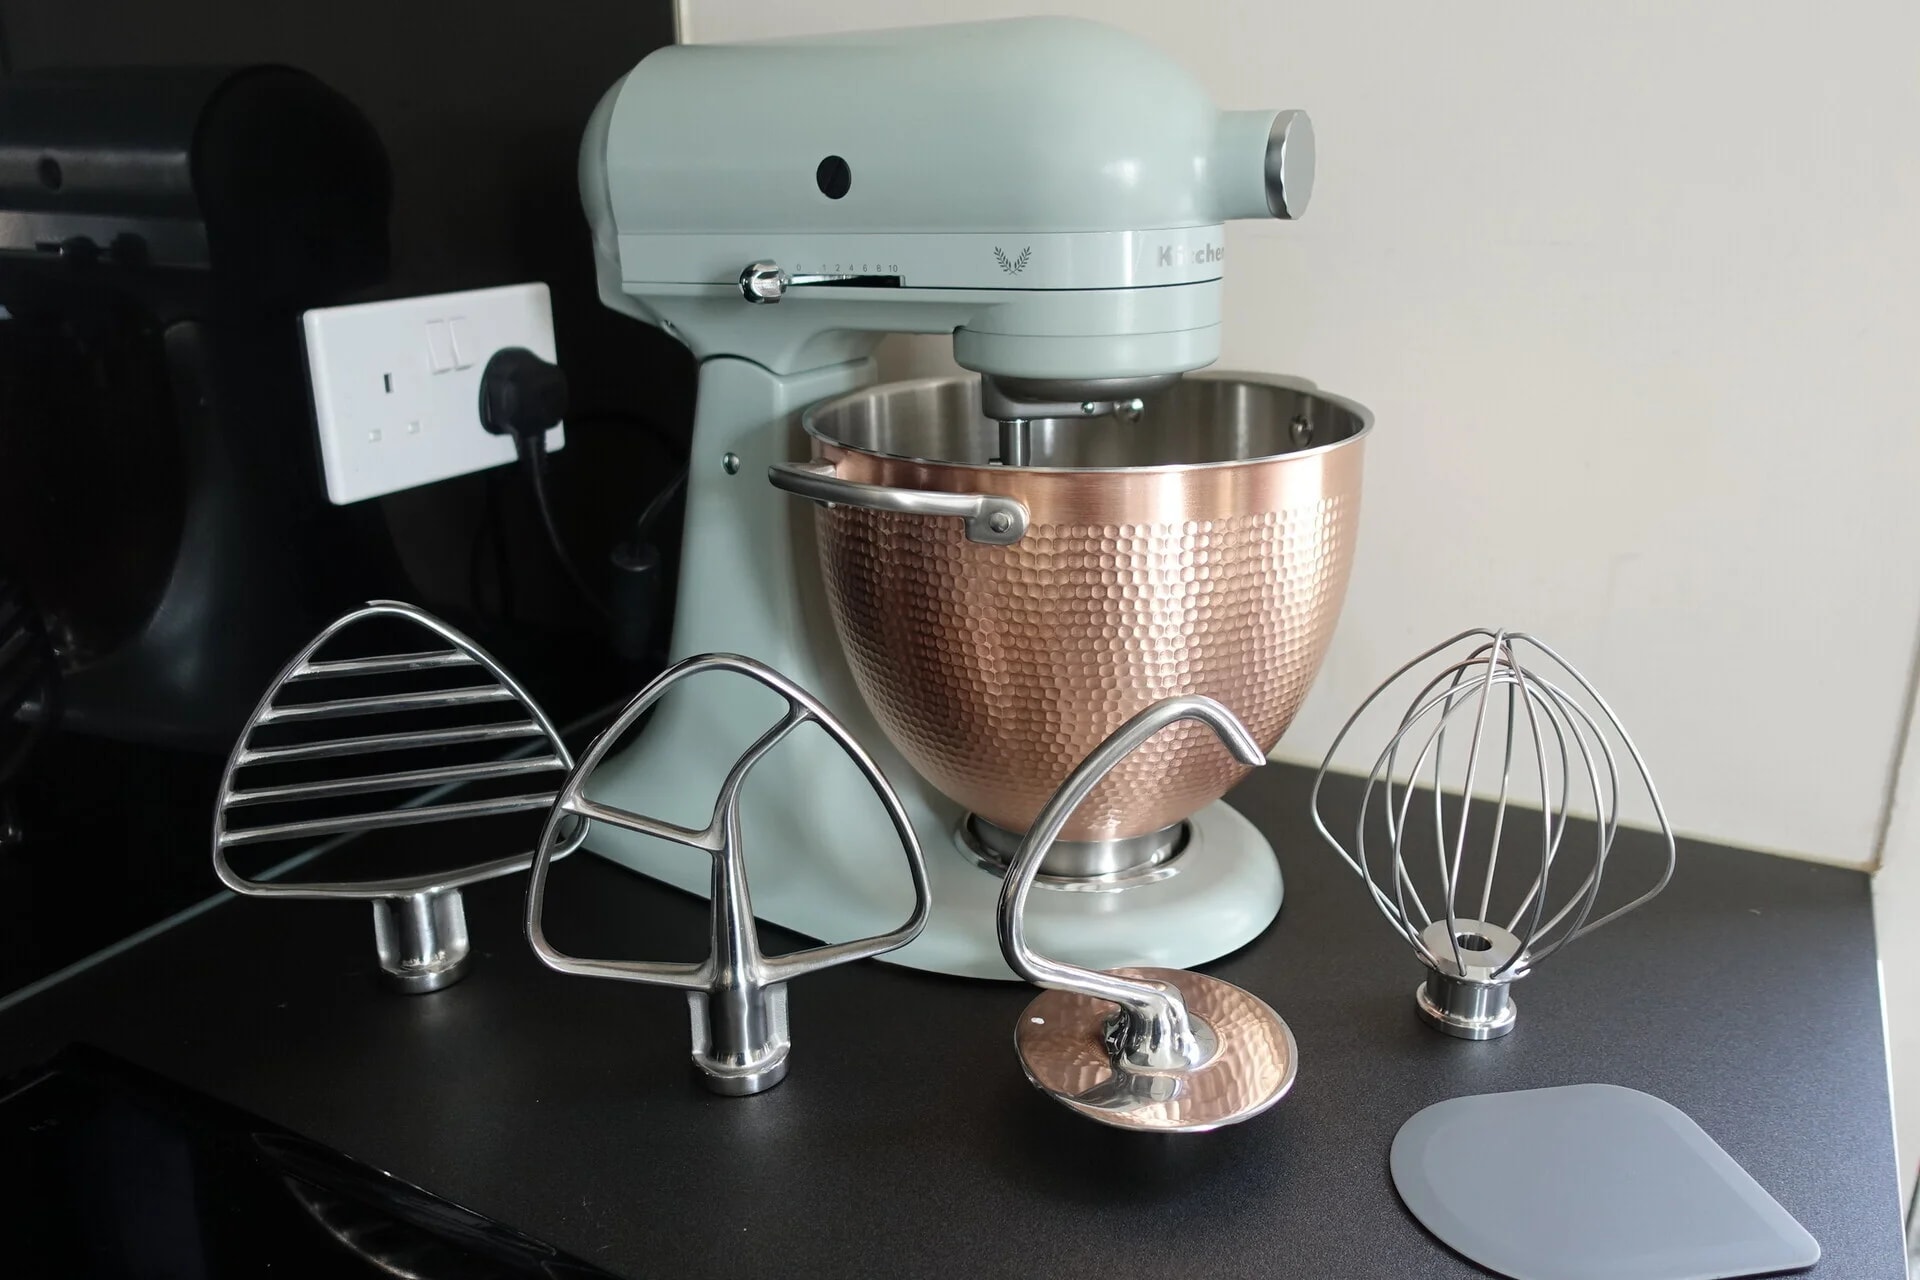 The Delish by Dash Compact Mixer